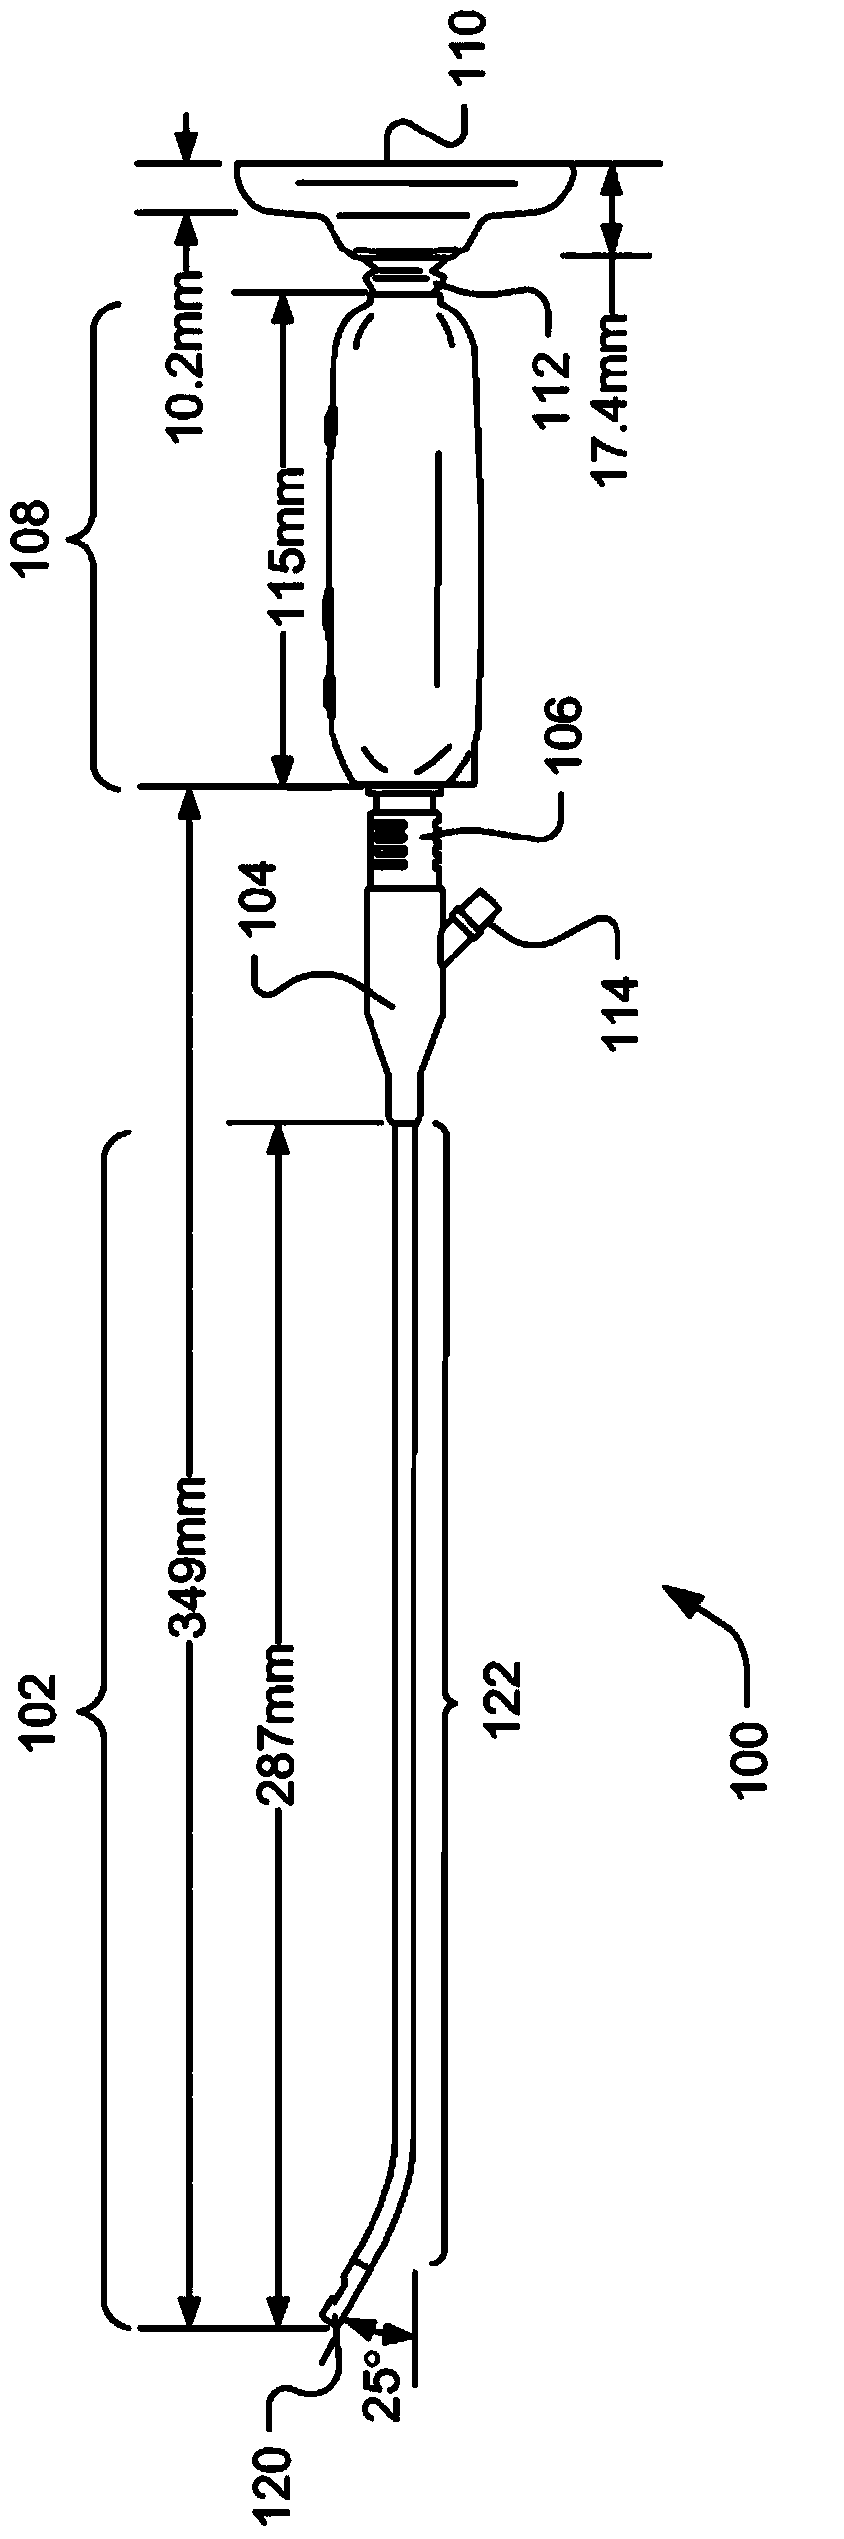 Method and apparatus for hysteroscopy and endometrial biopsy